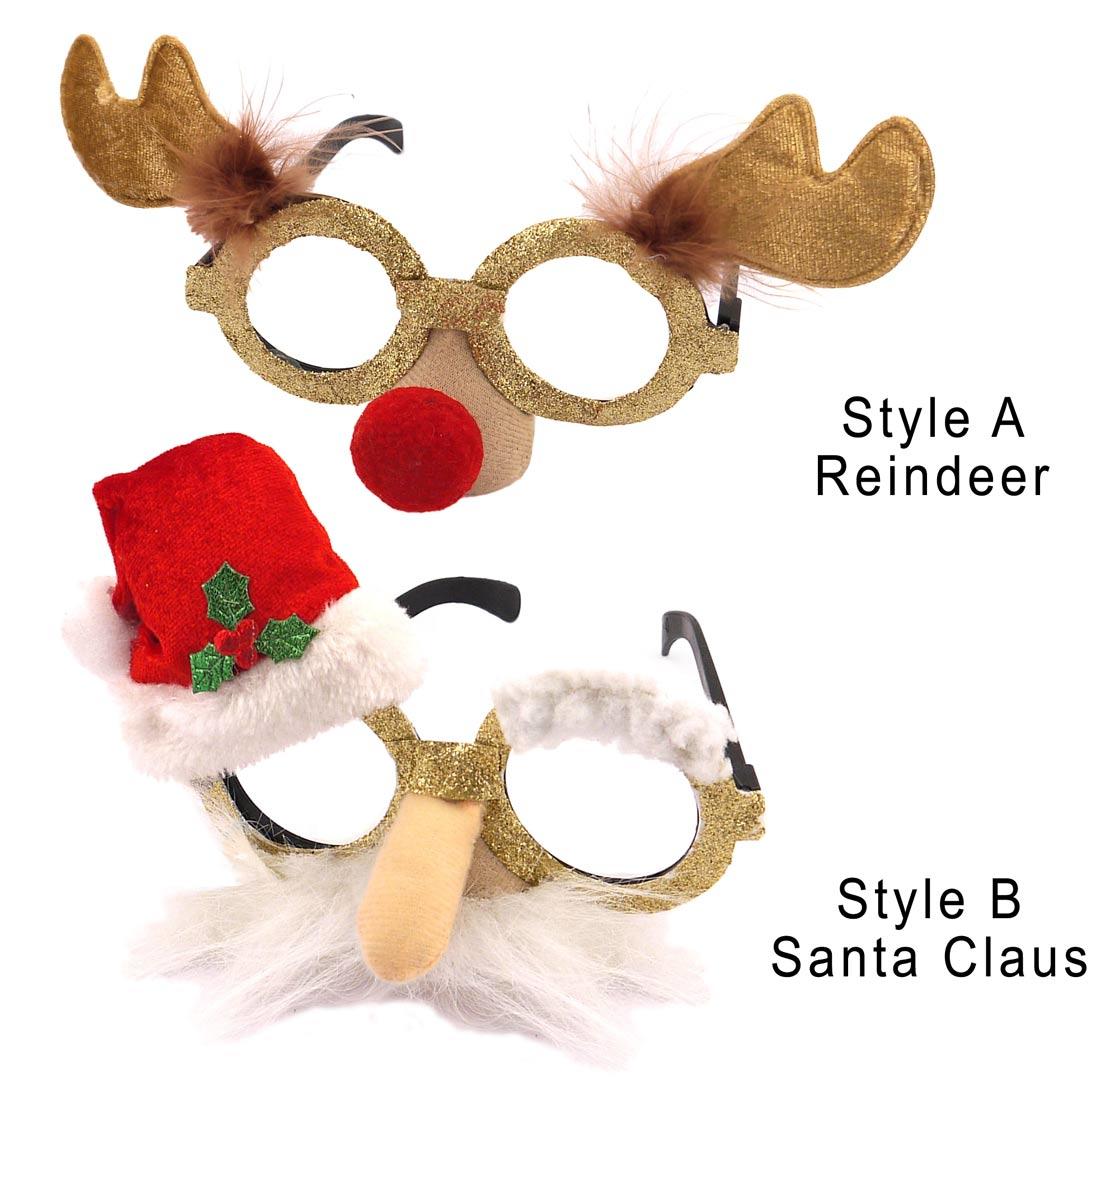 Novelty Christmas Glasses, Reindeer or Santa Glasses by Henbrandt W57 037 available here at Karnival Costumes online Christmas party shop